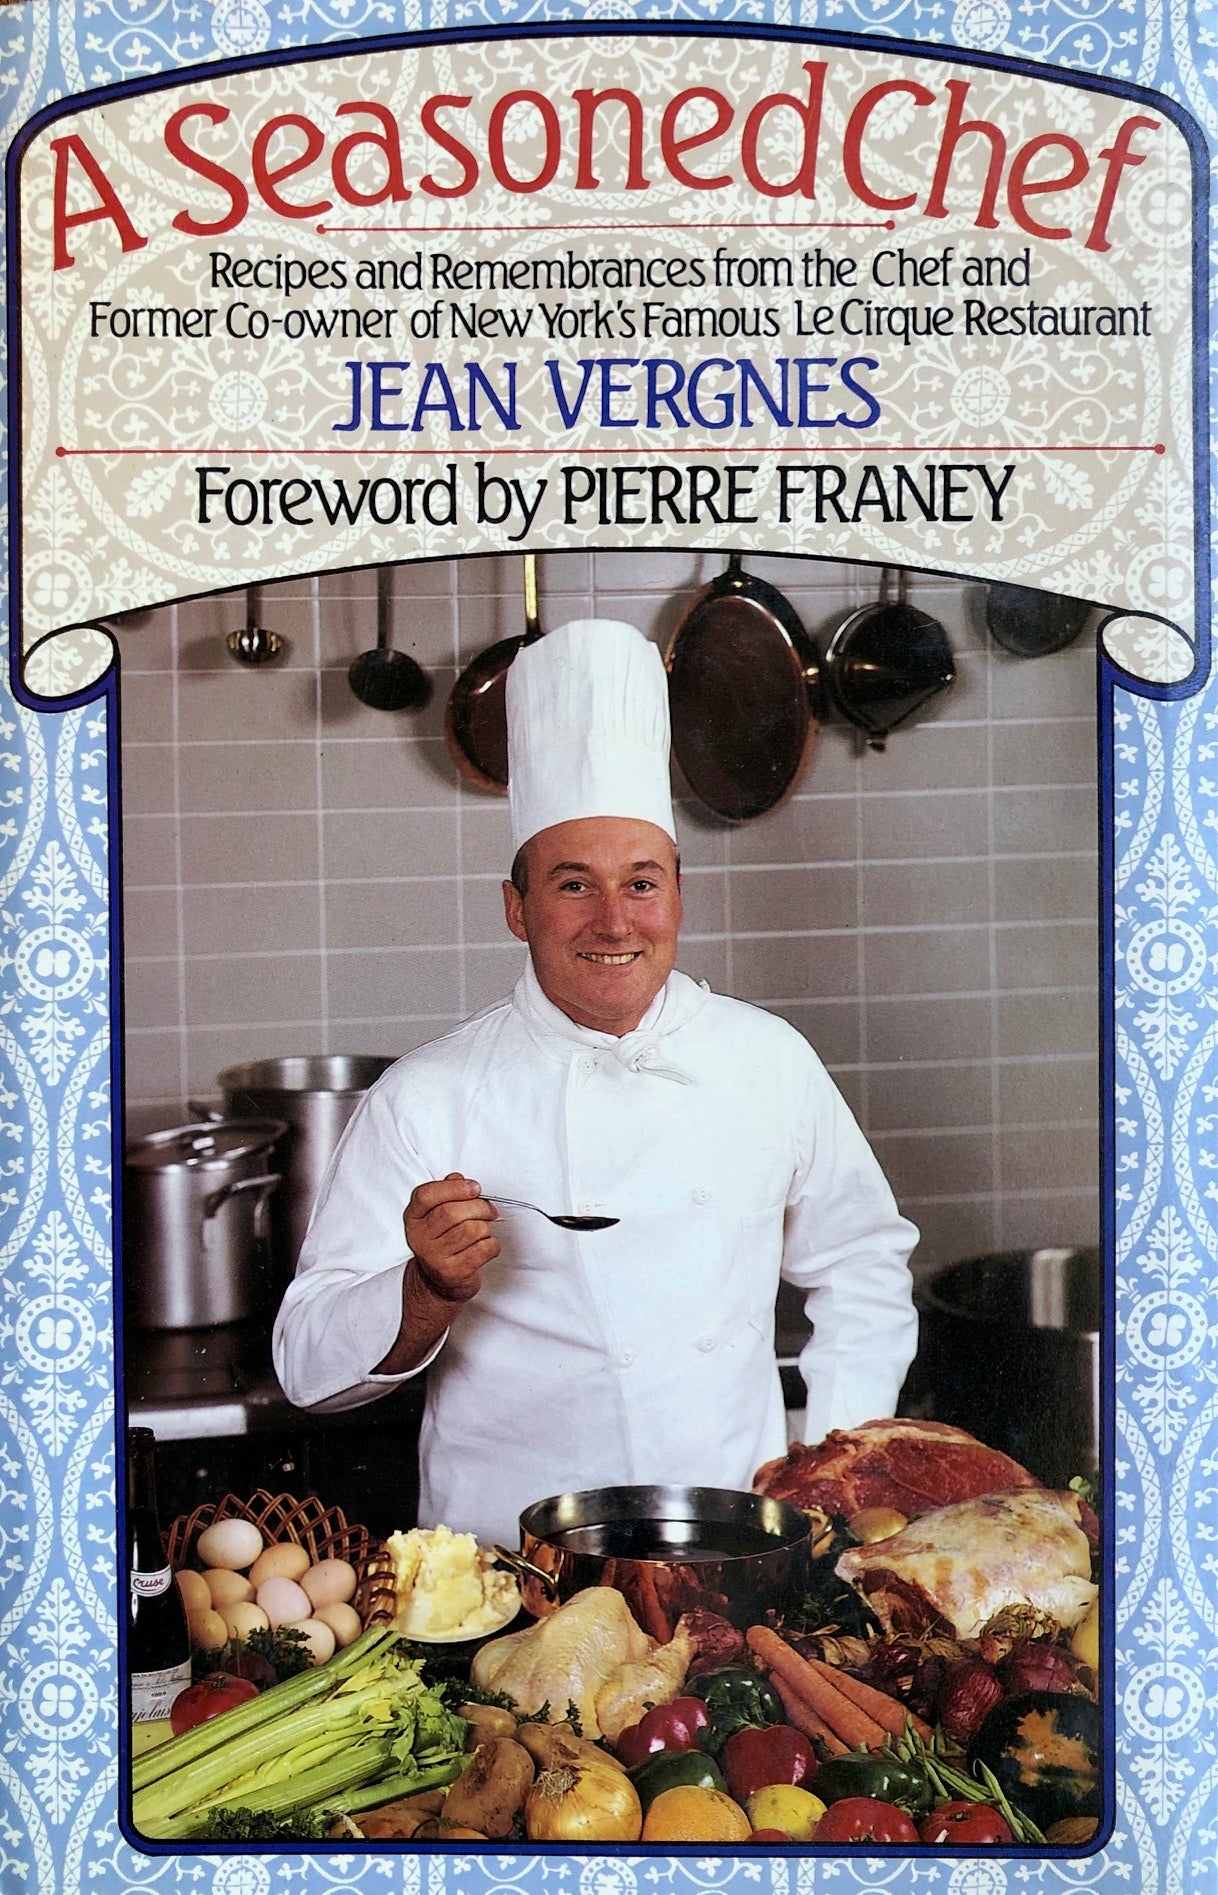 (French) Jean Vergens. A Seasoned Chef: Recipes and Remembrances from the Chef and Former Co-Owner of New York's Famous Le Cirque Restaurant. Foreword by Pierre Franey.